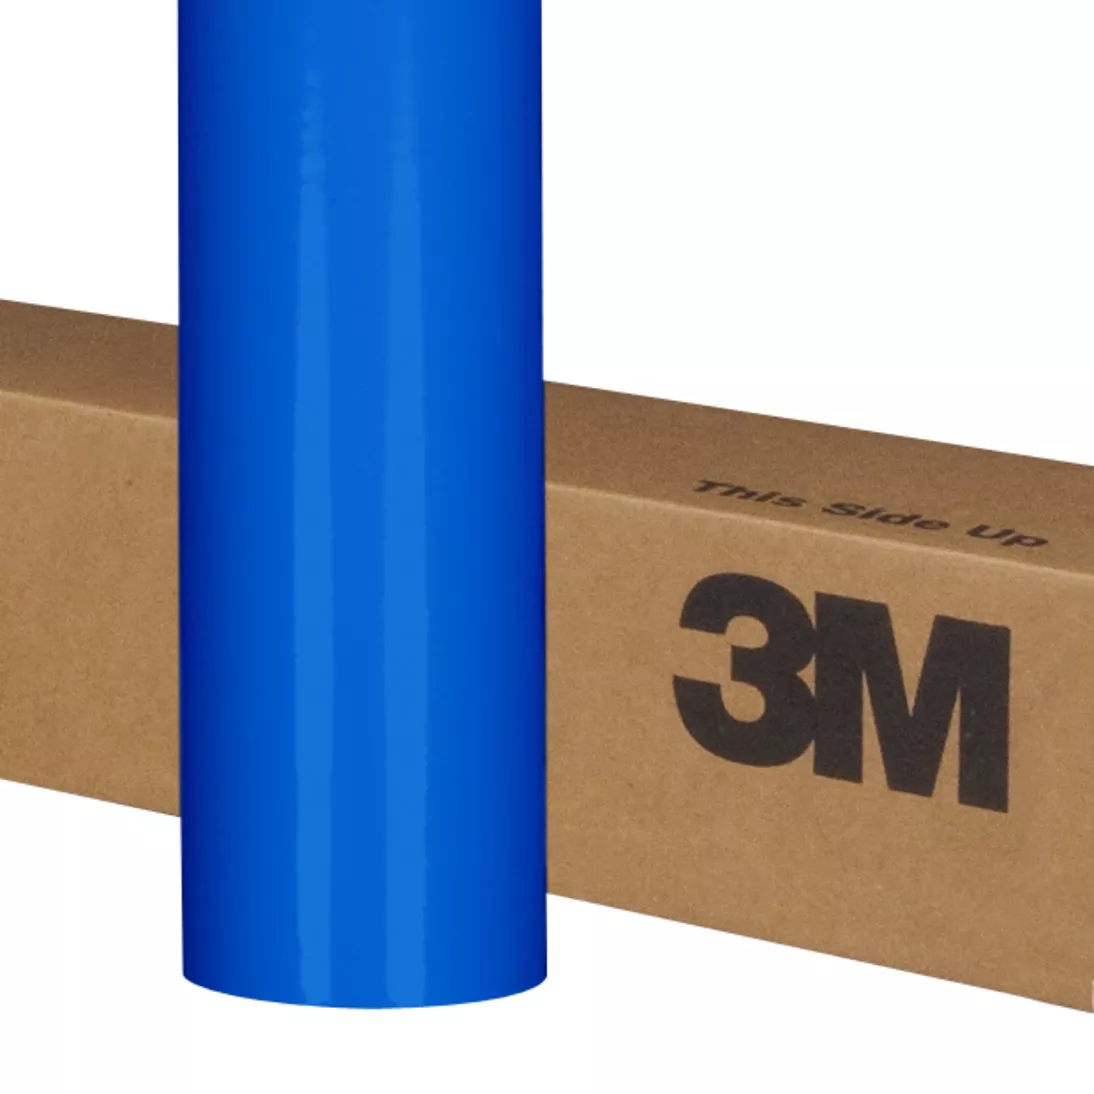 3M™ Scotchcal™ Translucent Graphic Film 3630-337, Process Blue, 60 in x
50 yd